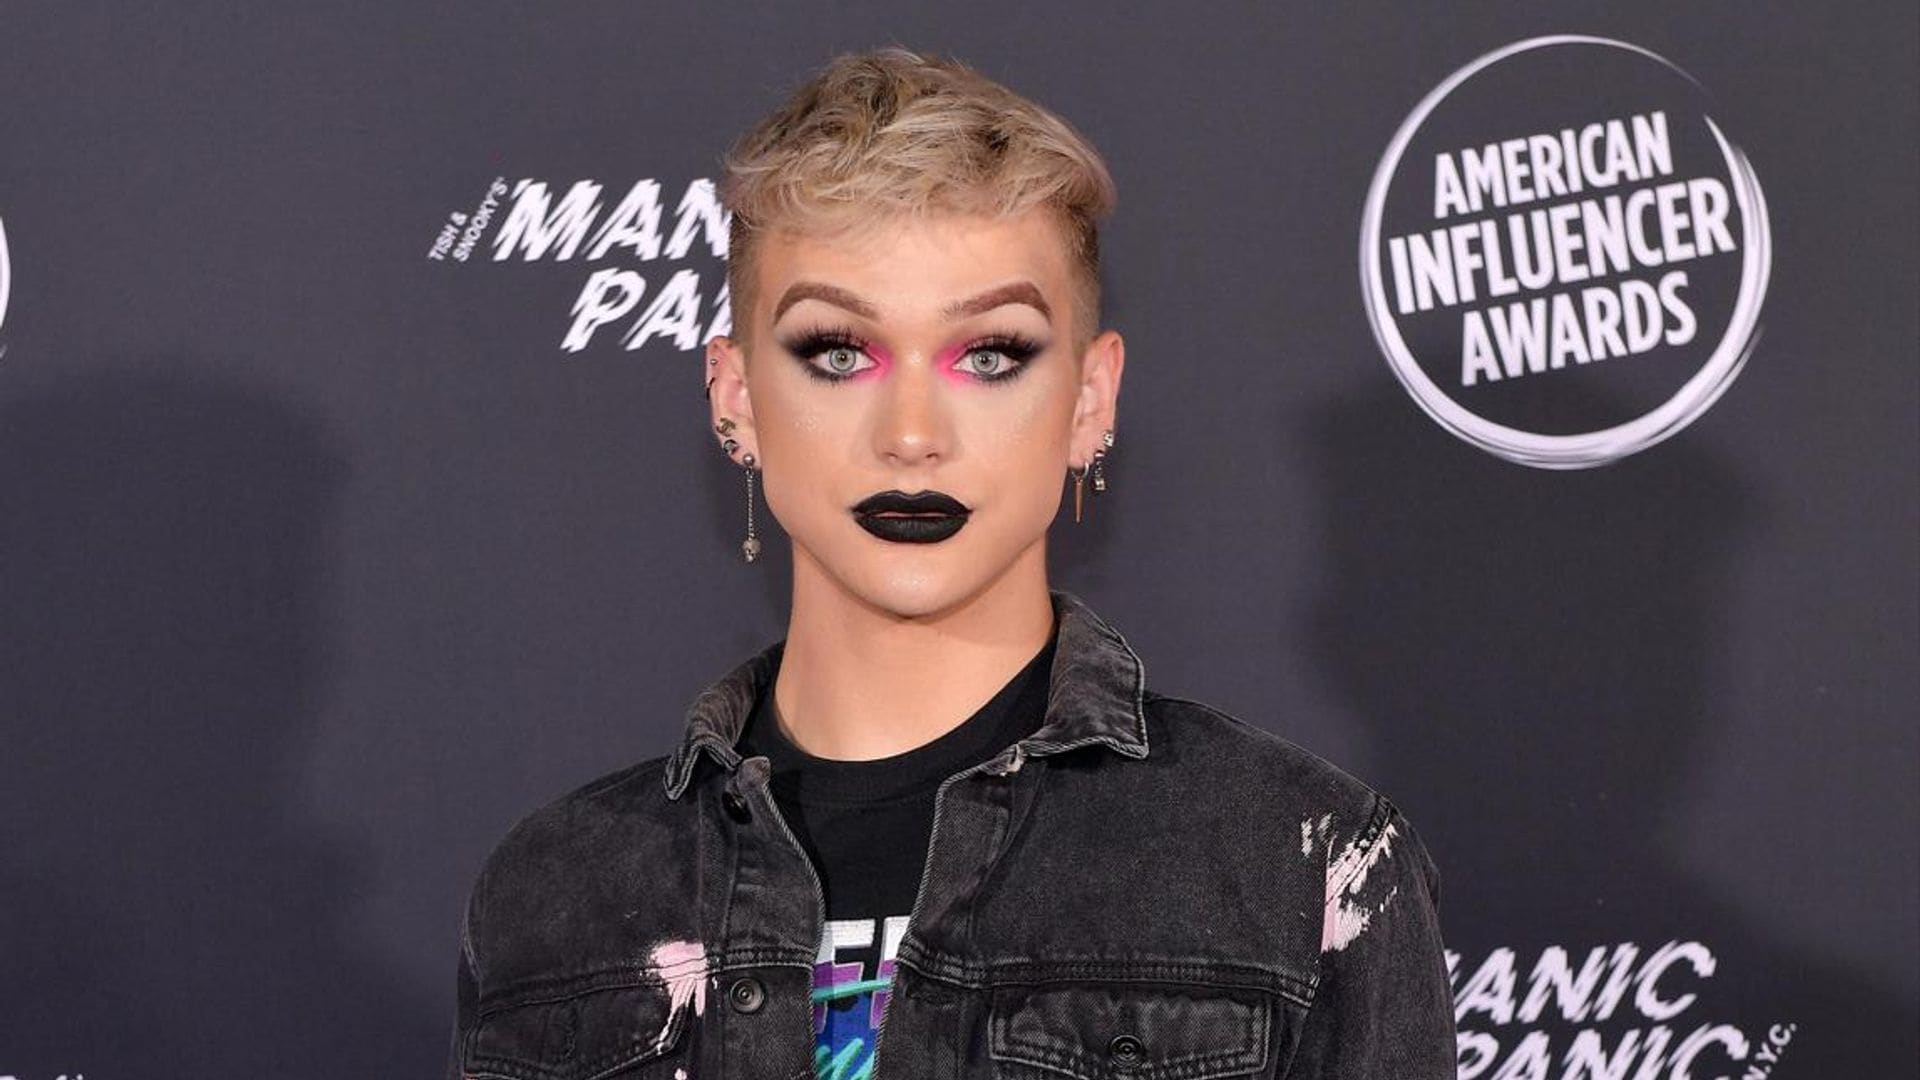 Influencer and makeup guru has died at the age of 17